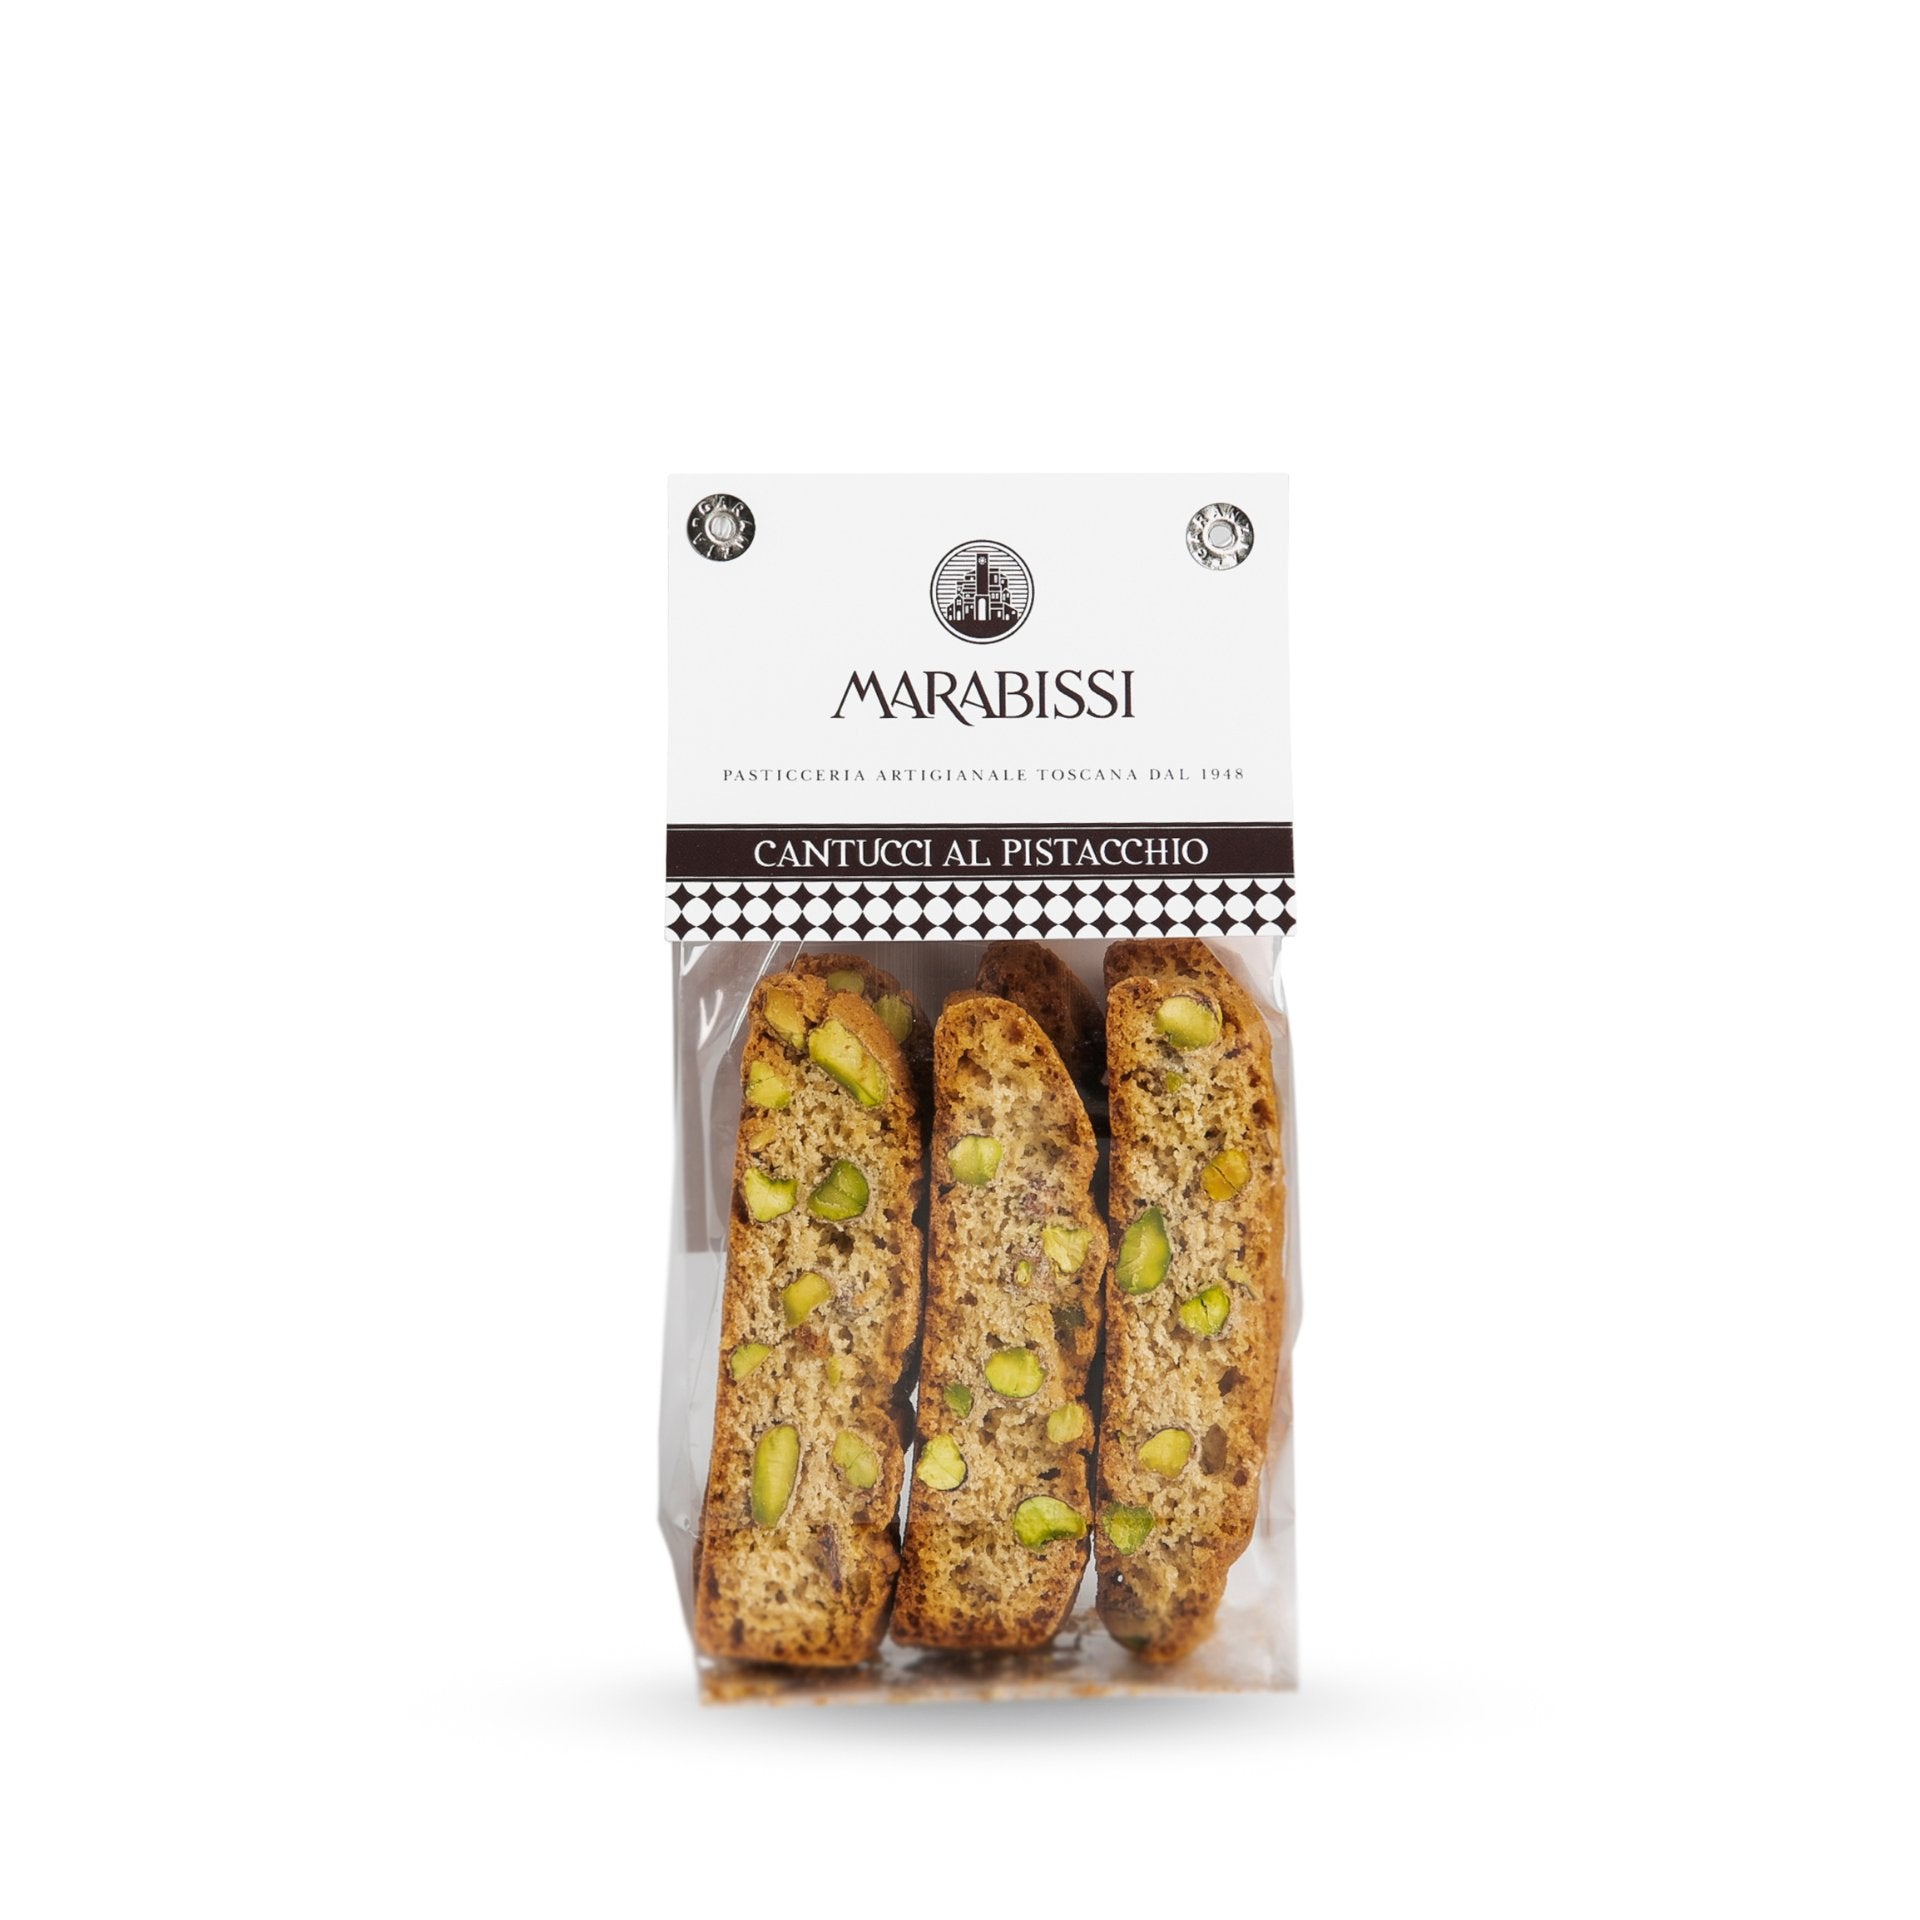 Marabissi Pistachio Cantucci from Siena 120g Feast Italy